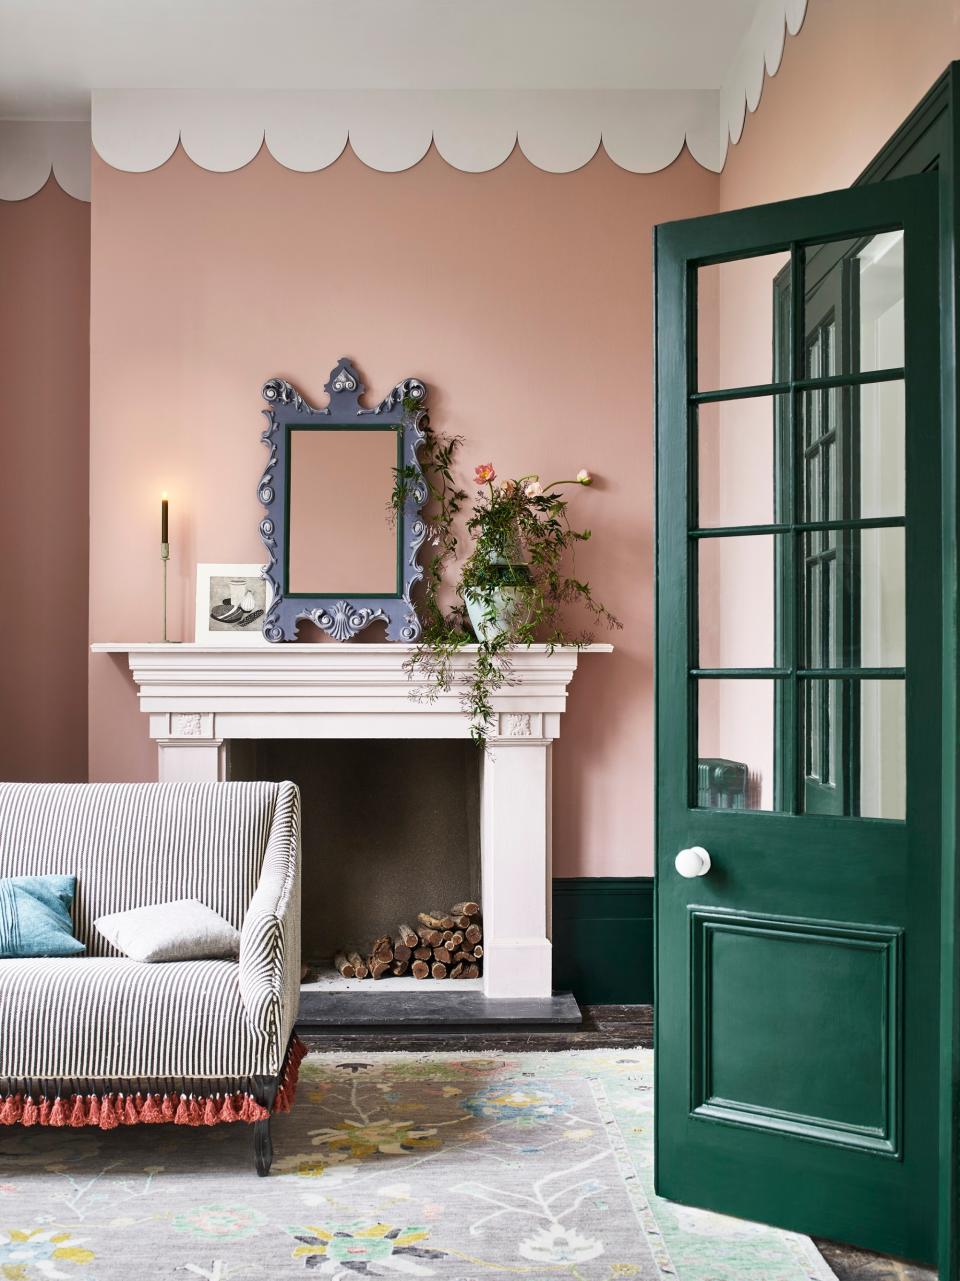 Annie Sloan - Living room - Satin Paint in Knightsbridge Green and Pointe Silk, Piranesi Pink and Adelphi Wall Paint, Chalk Paint in Old Violet